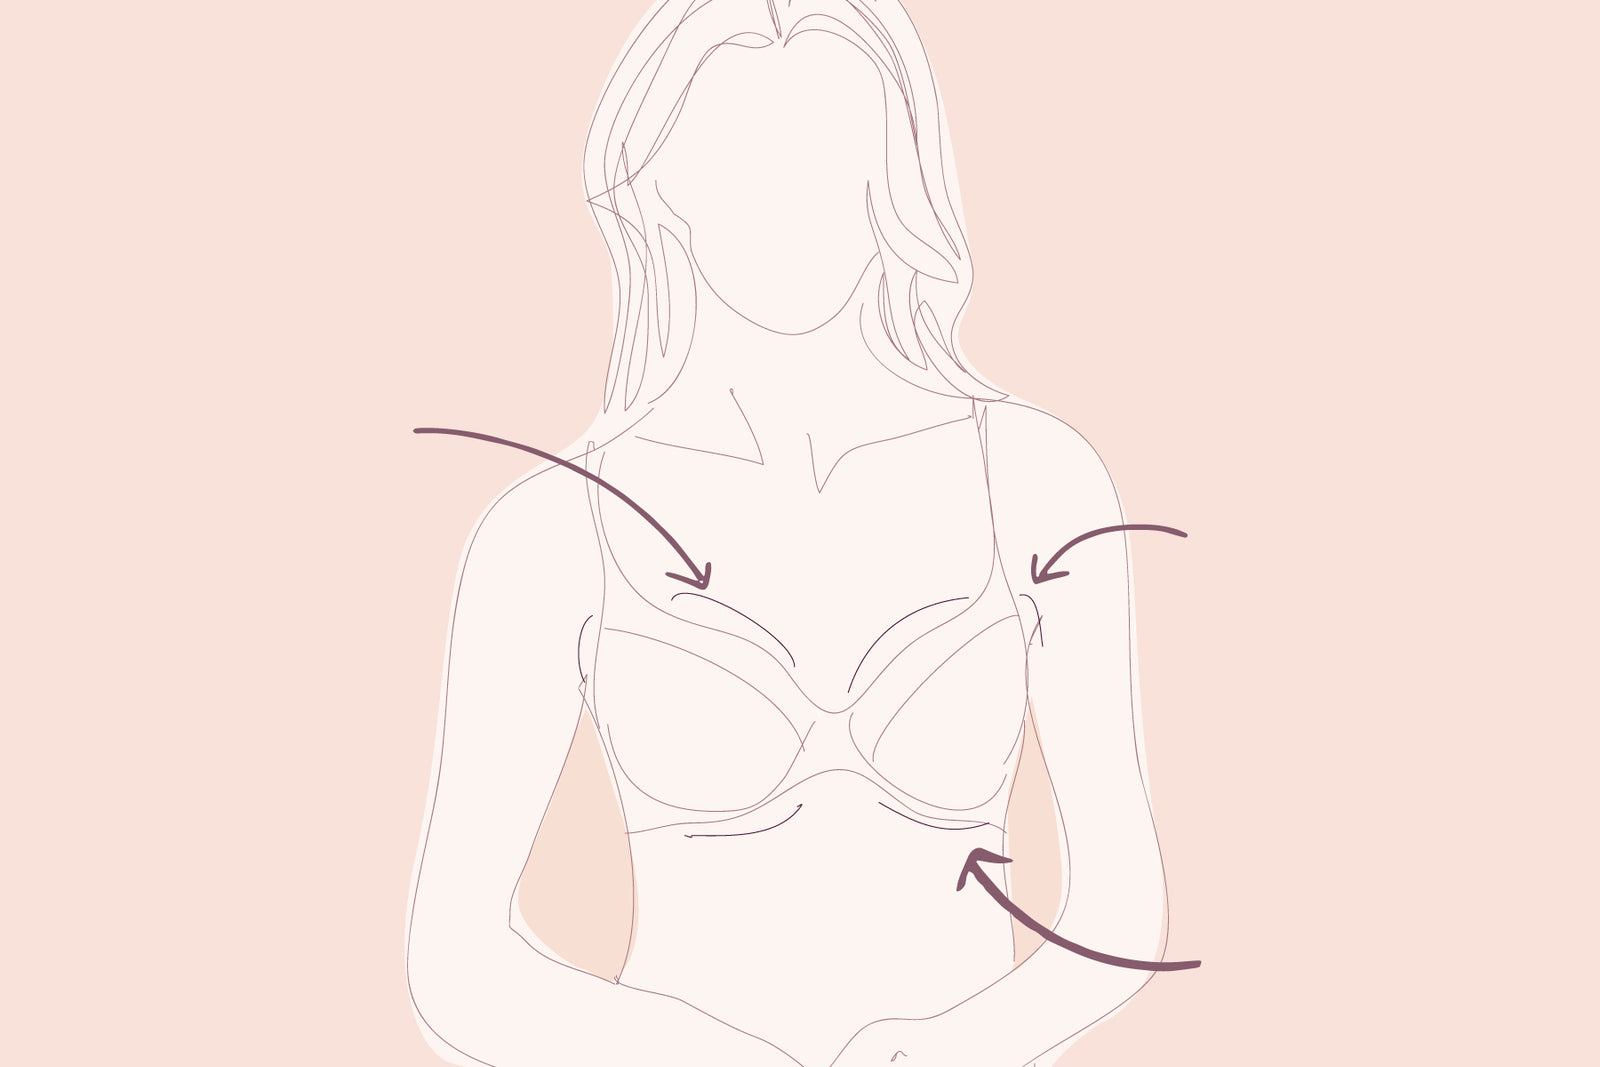 My no-bra hack works great when you don't have nipple pasties - if you're  under 50 you should already have what you need